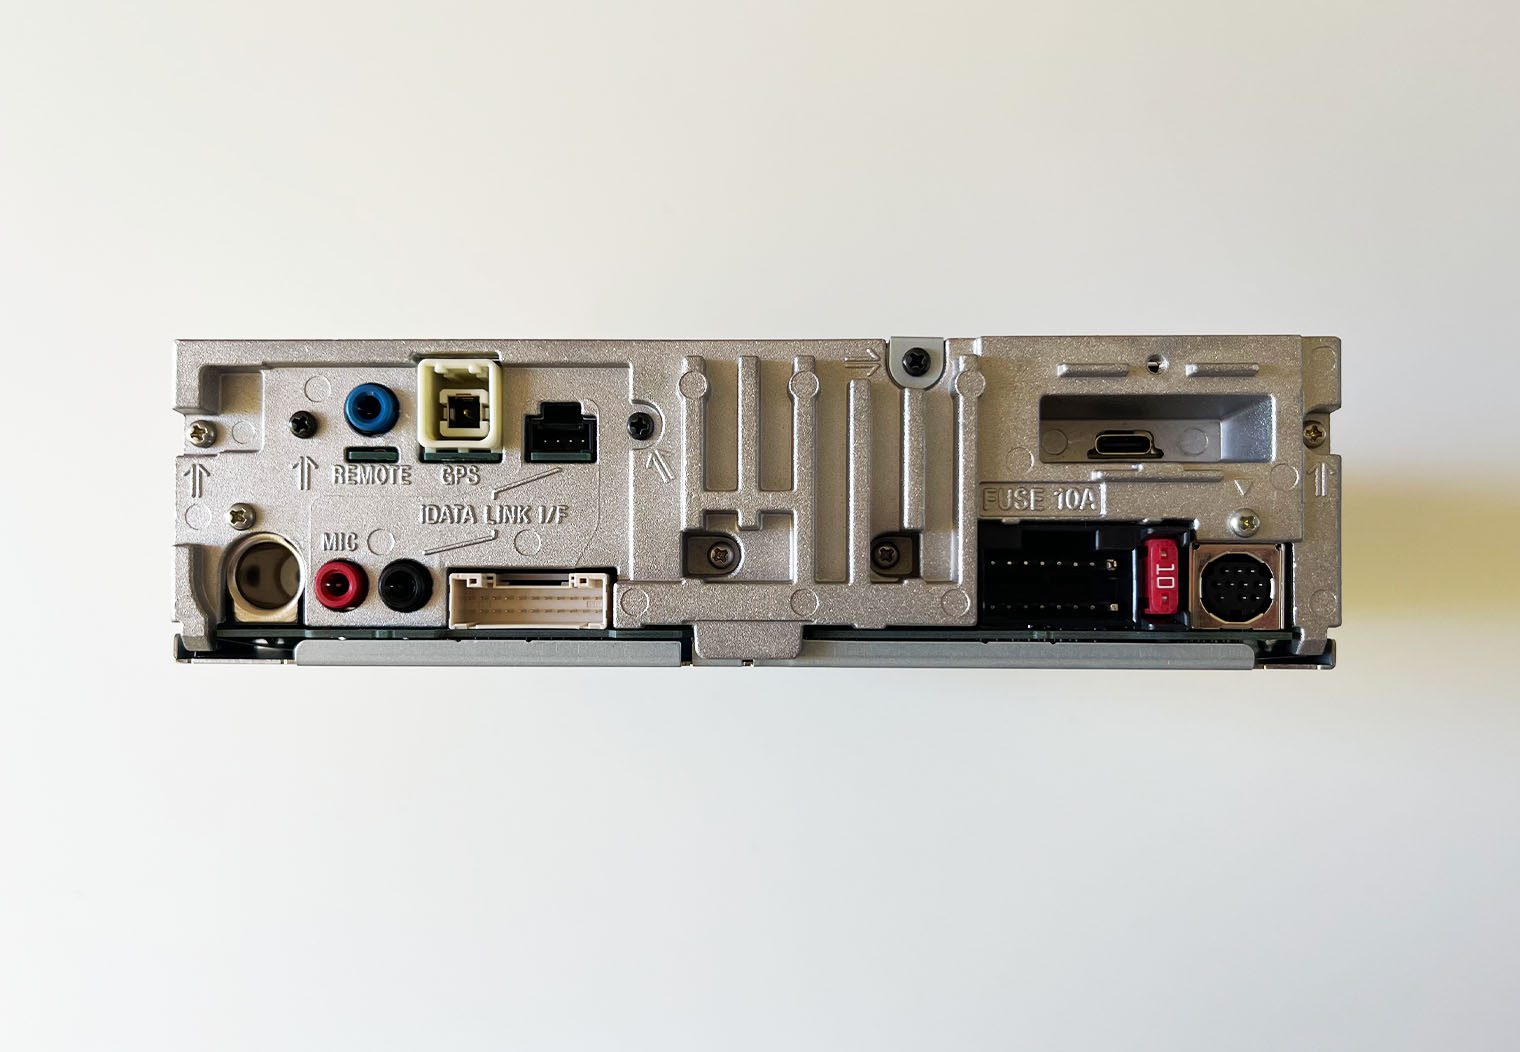 Rear view of the Sony XAV-9500ES chassis where the inputs and outputs are